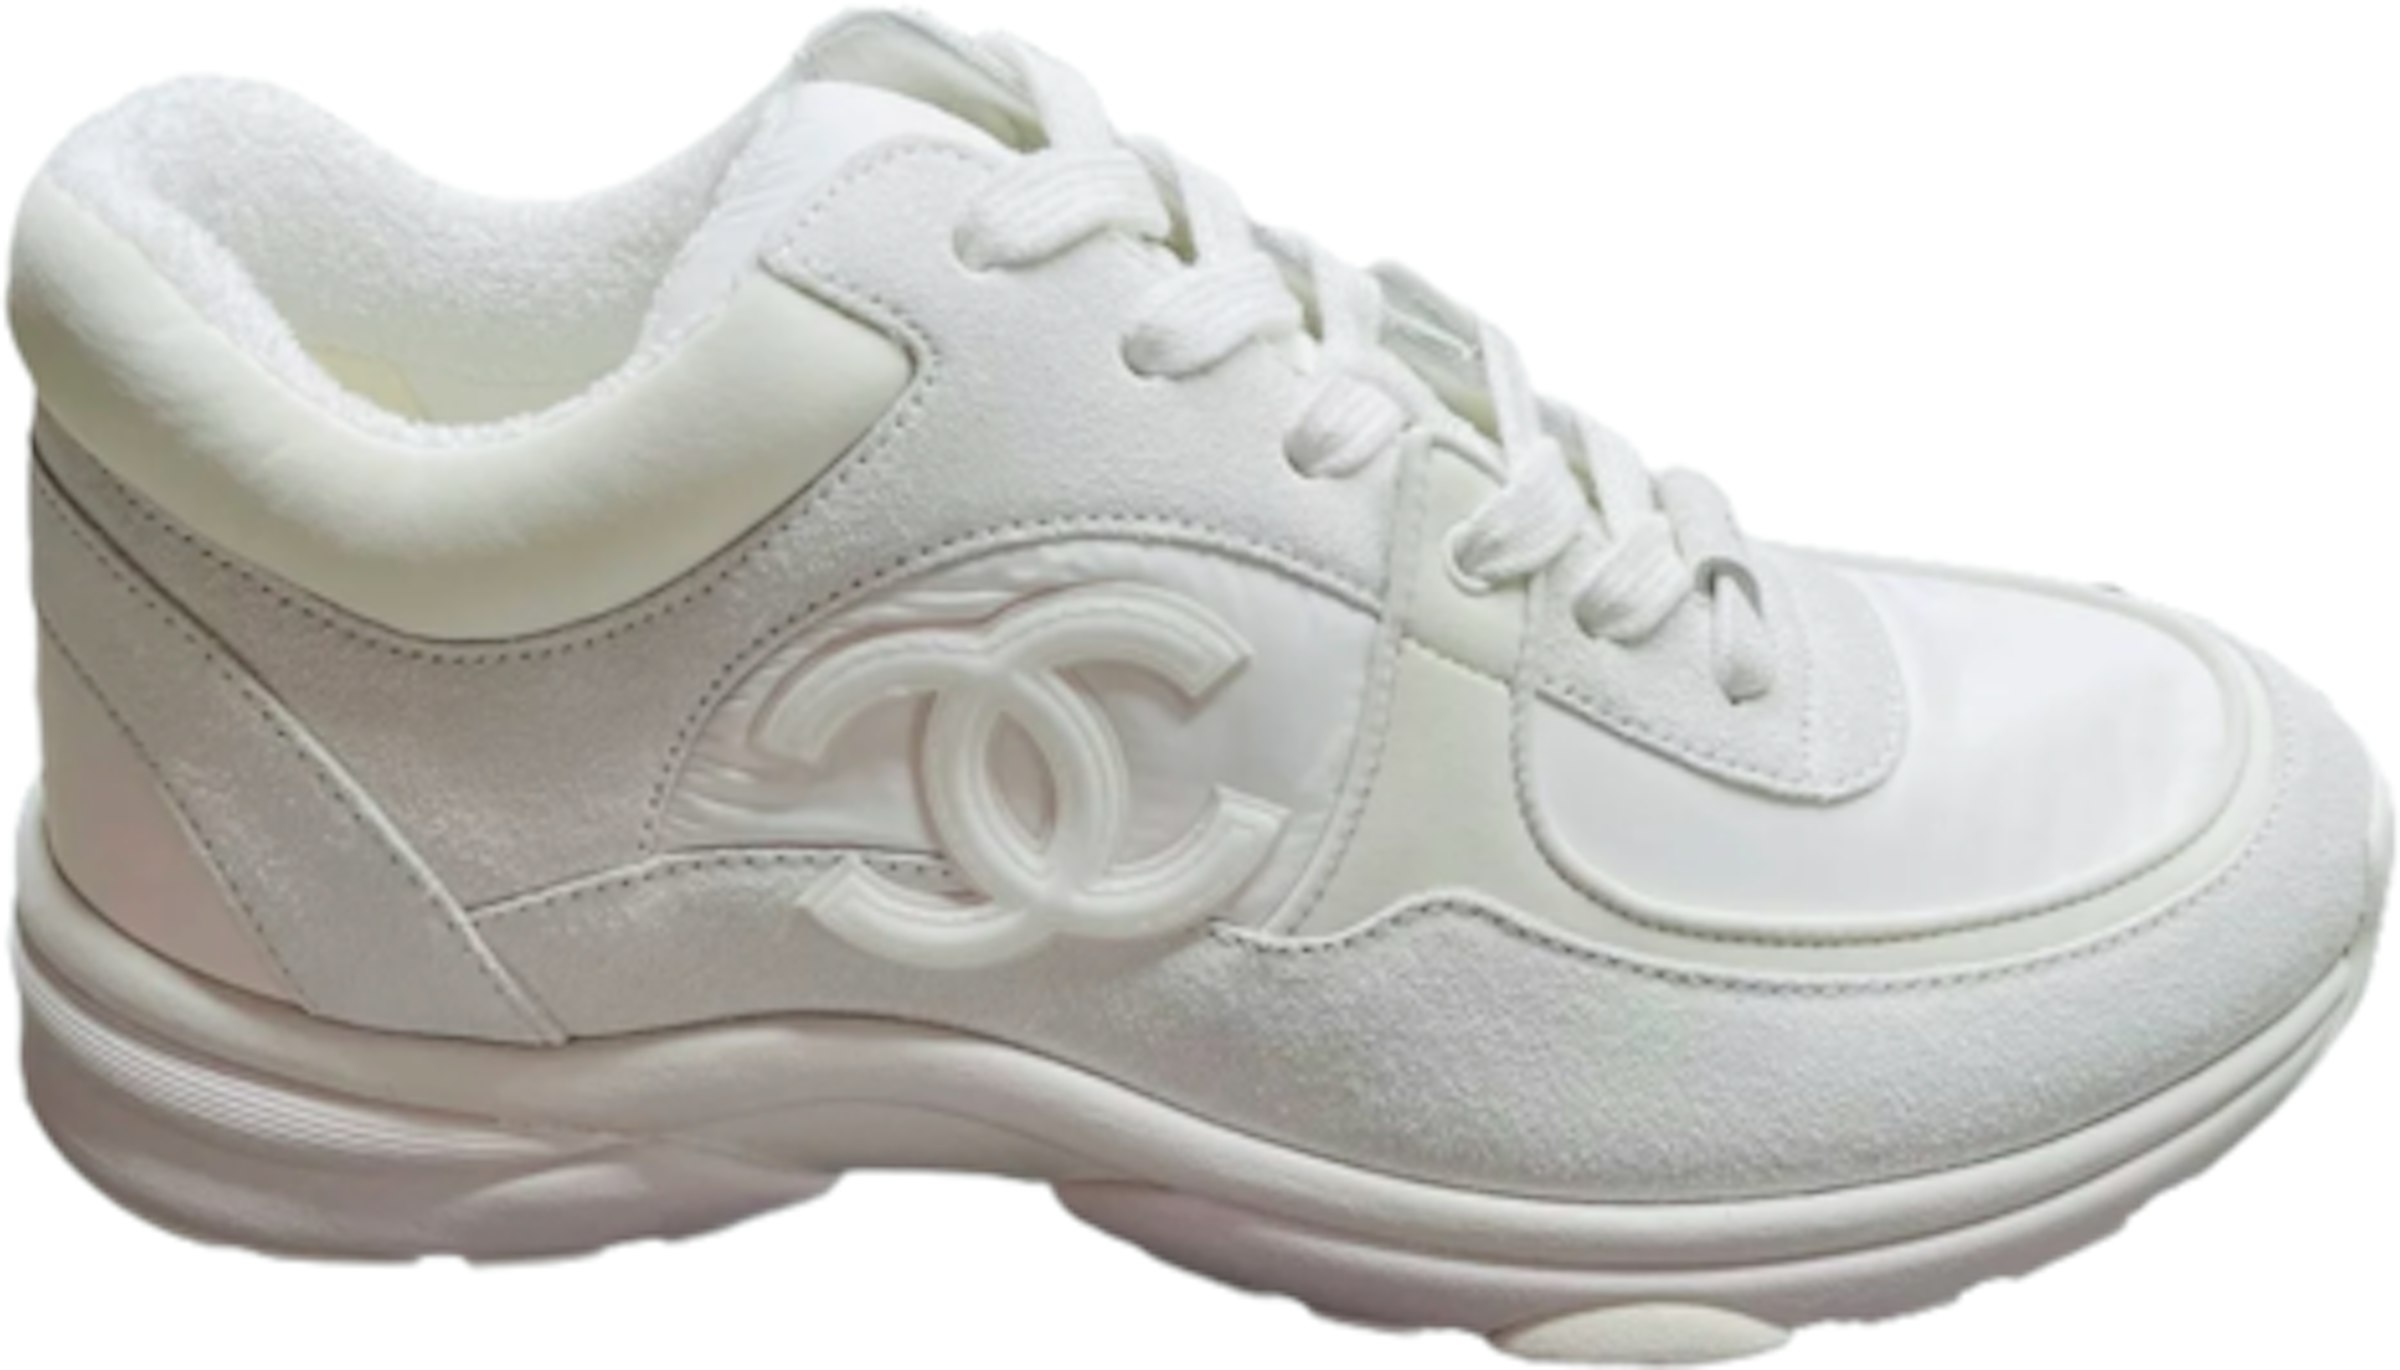 Chanel Low Top Trainer White Suede - G34360 Y53536 0I259 US